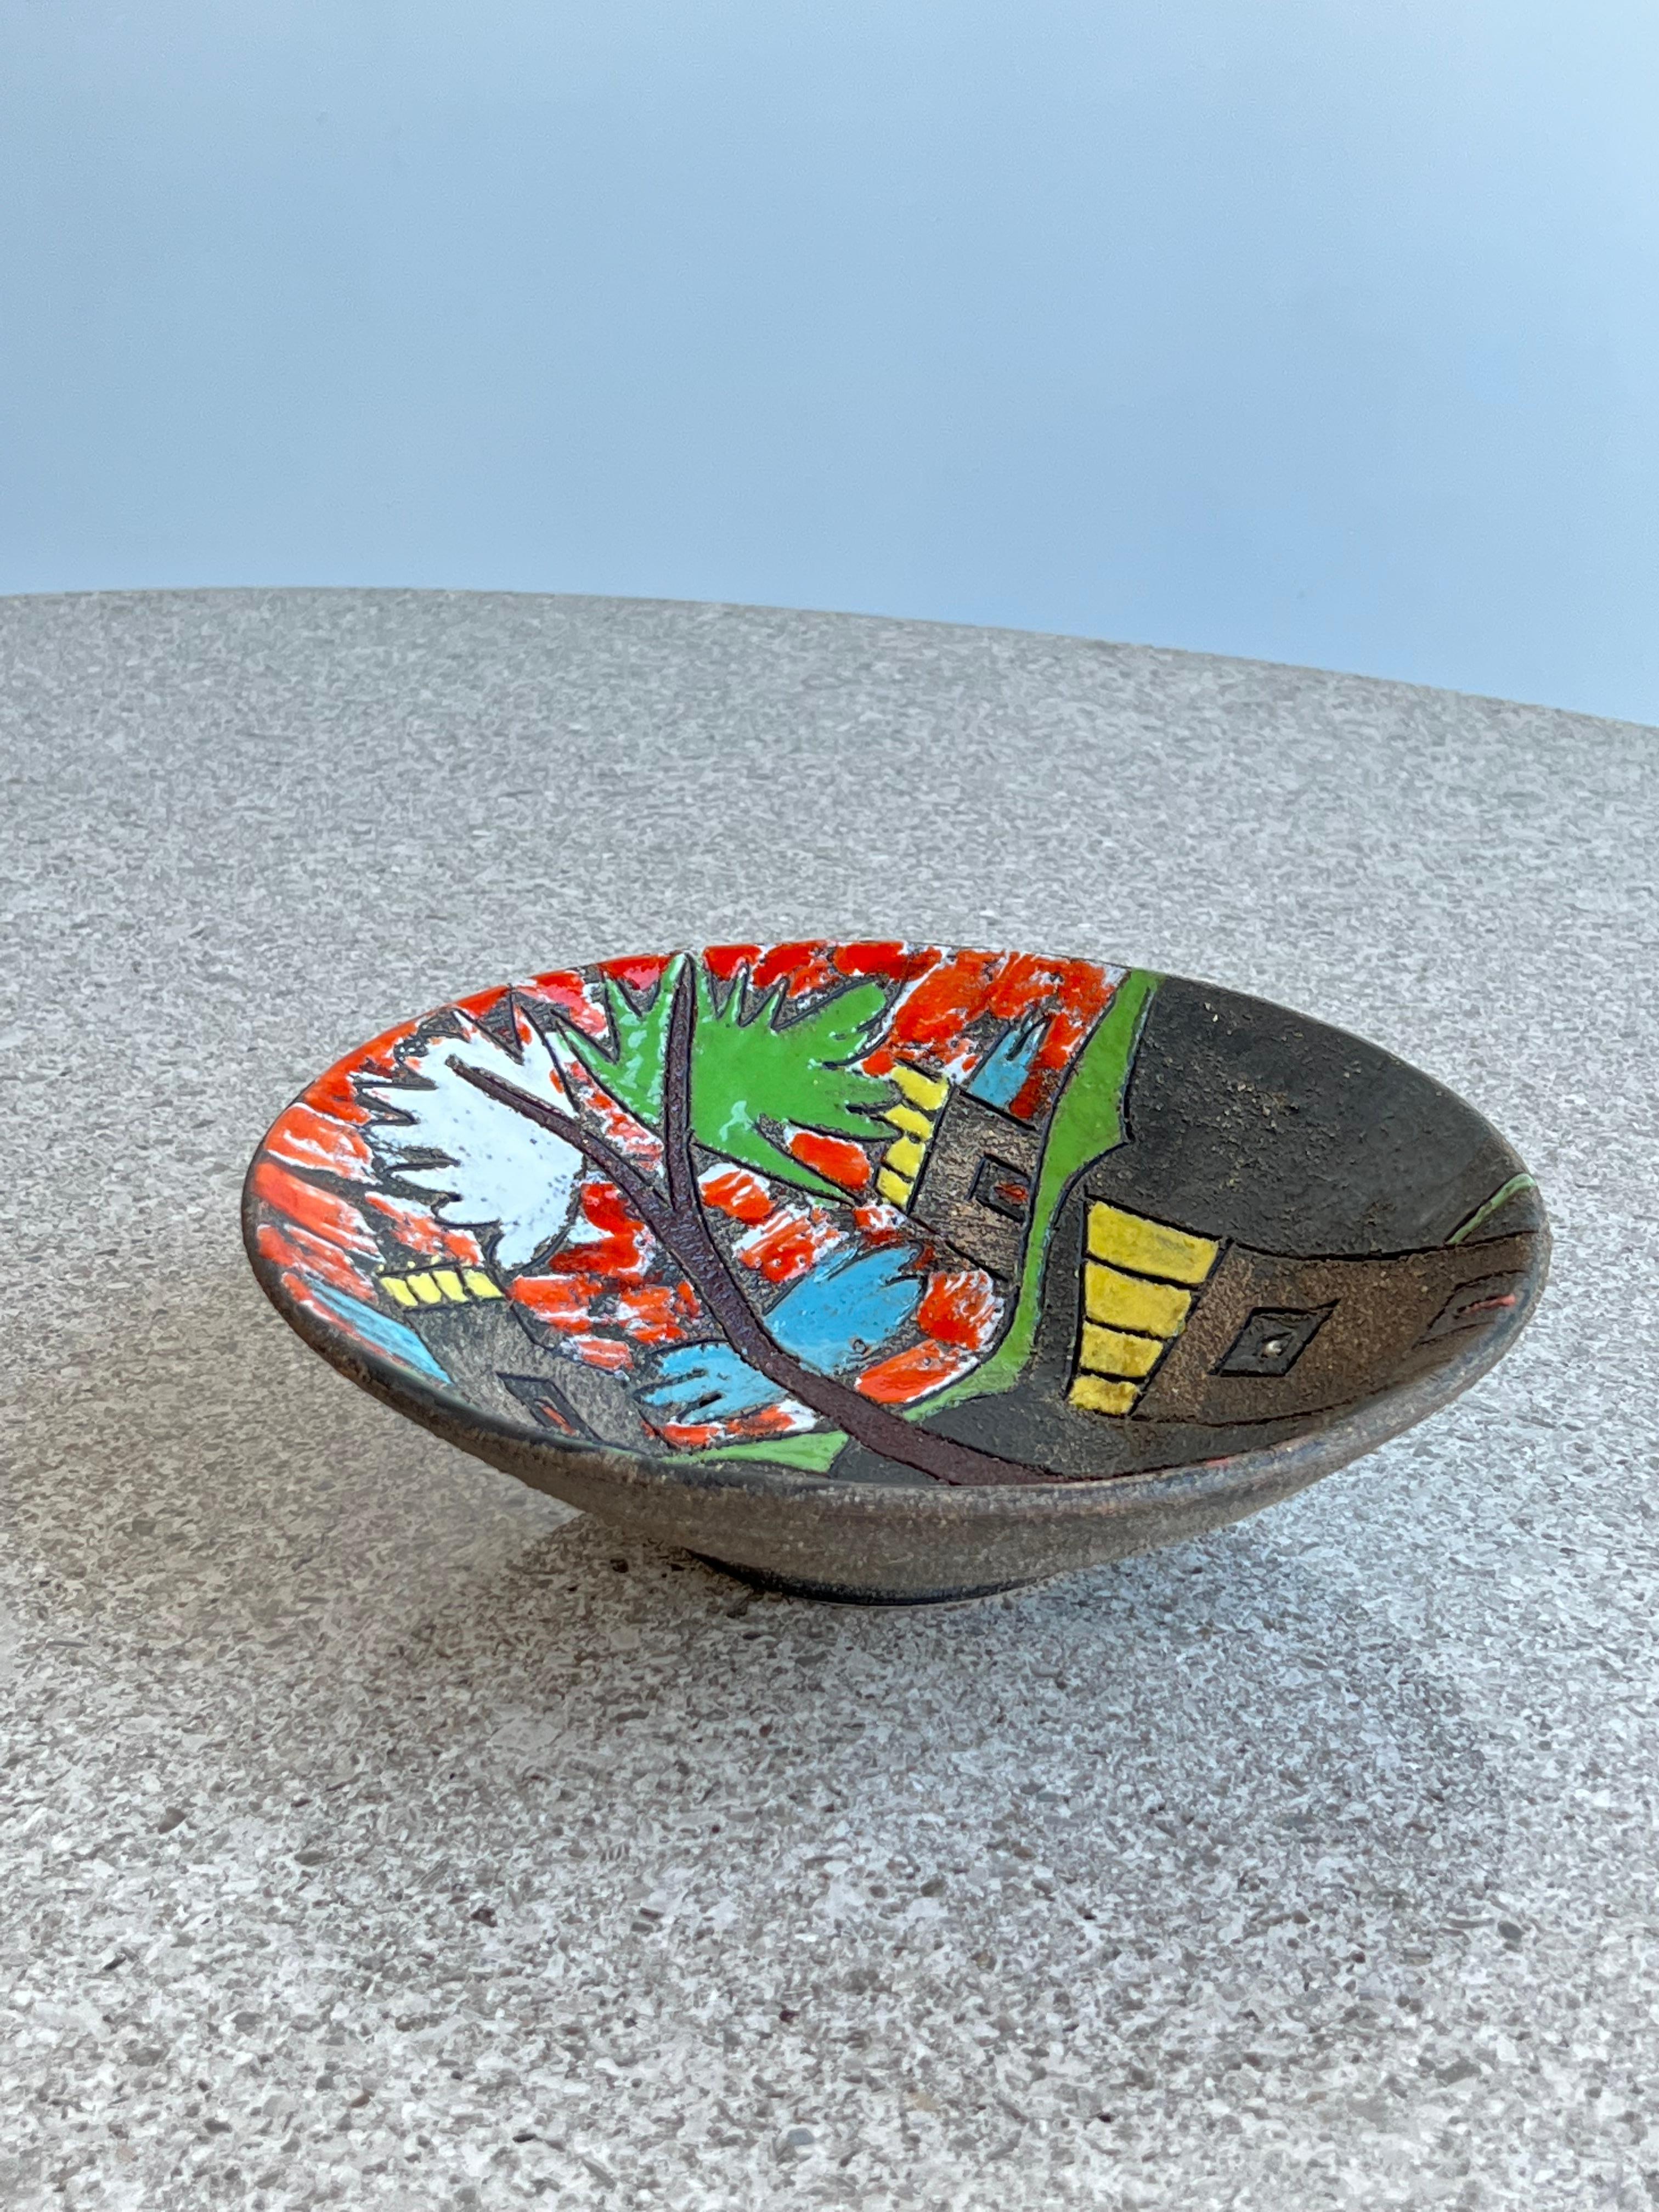 Italian Art Ceramic bowl by Aldo Londi 1960s.
Decorative plate, the art is hand painted representing a colourful land scape. 
Signature on the bottom on plate with serial number.
  